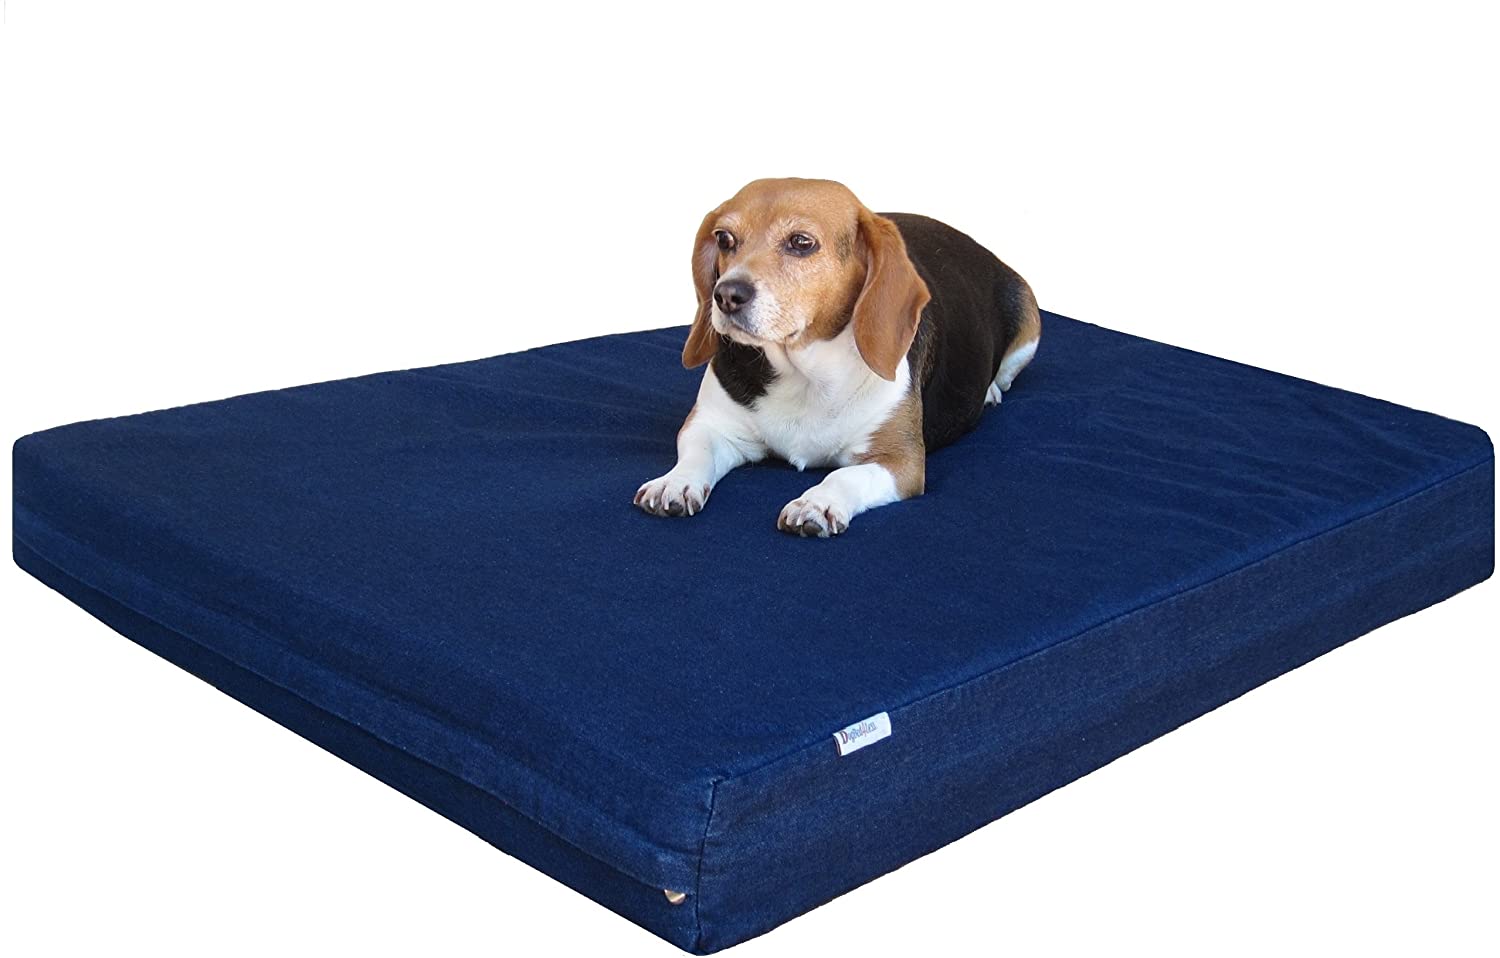 Dogbed4less Premium Memory Foam Dog Bed Waterproof Case